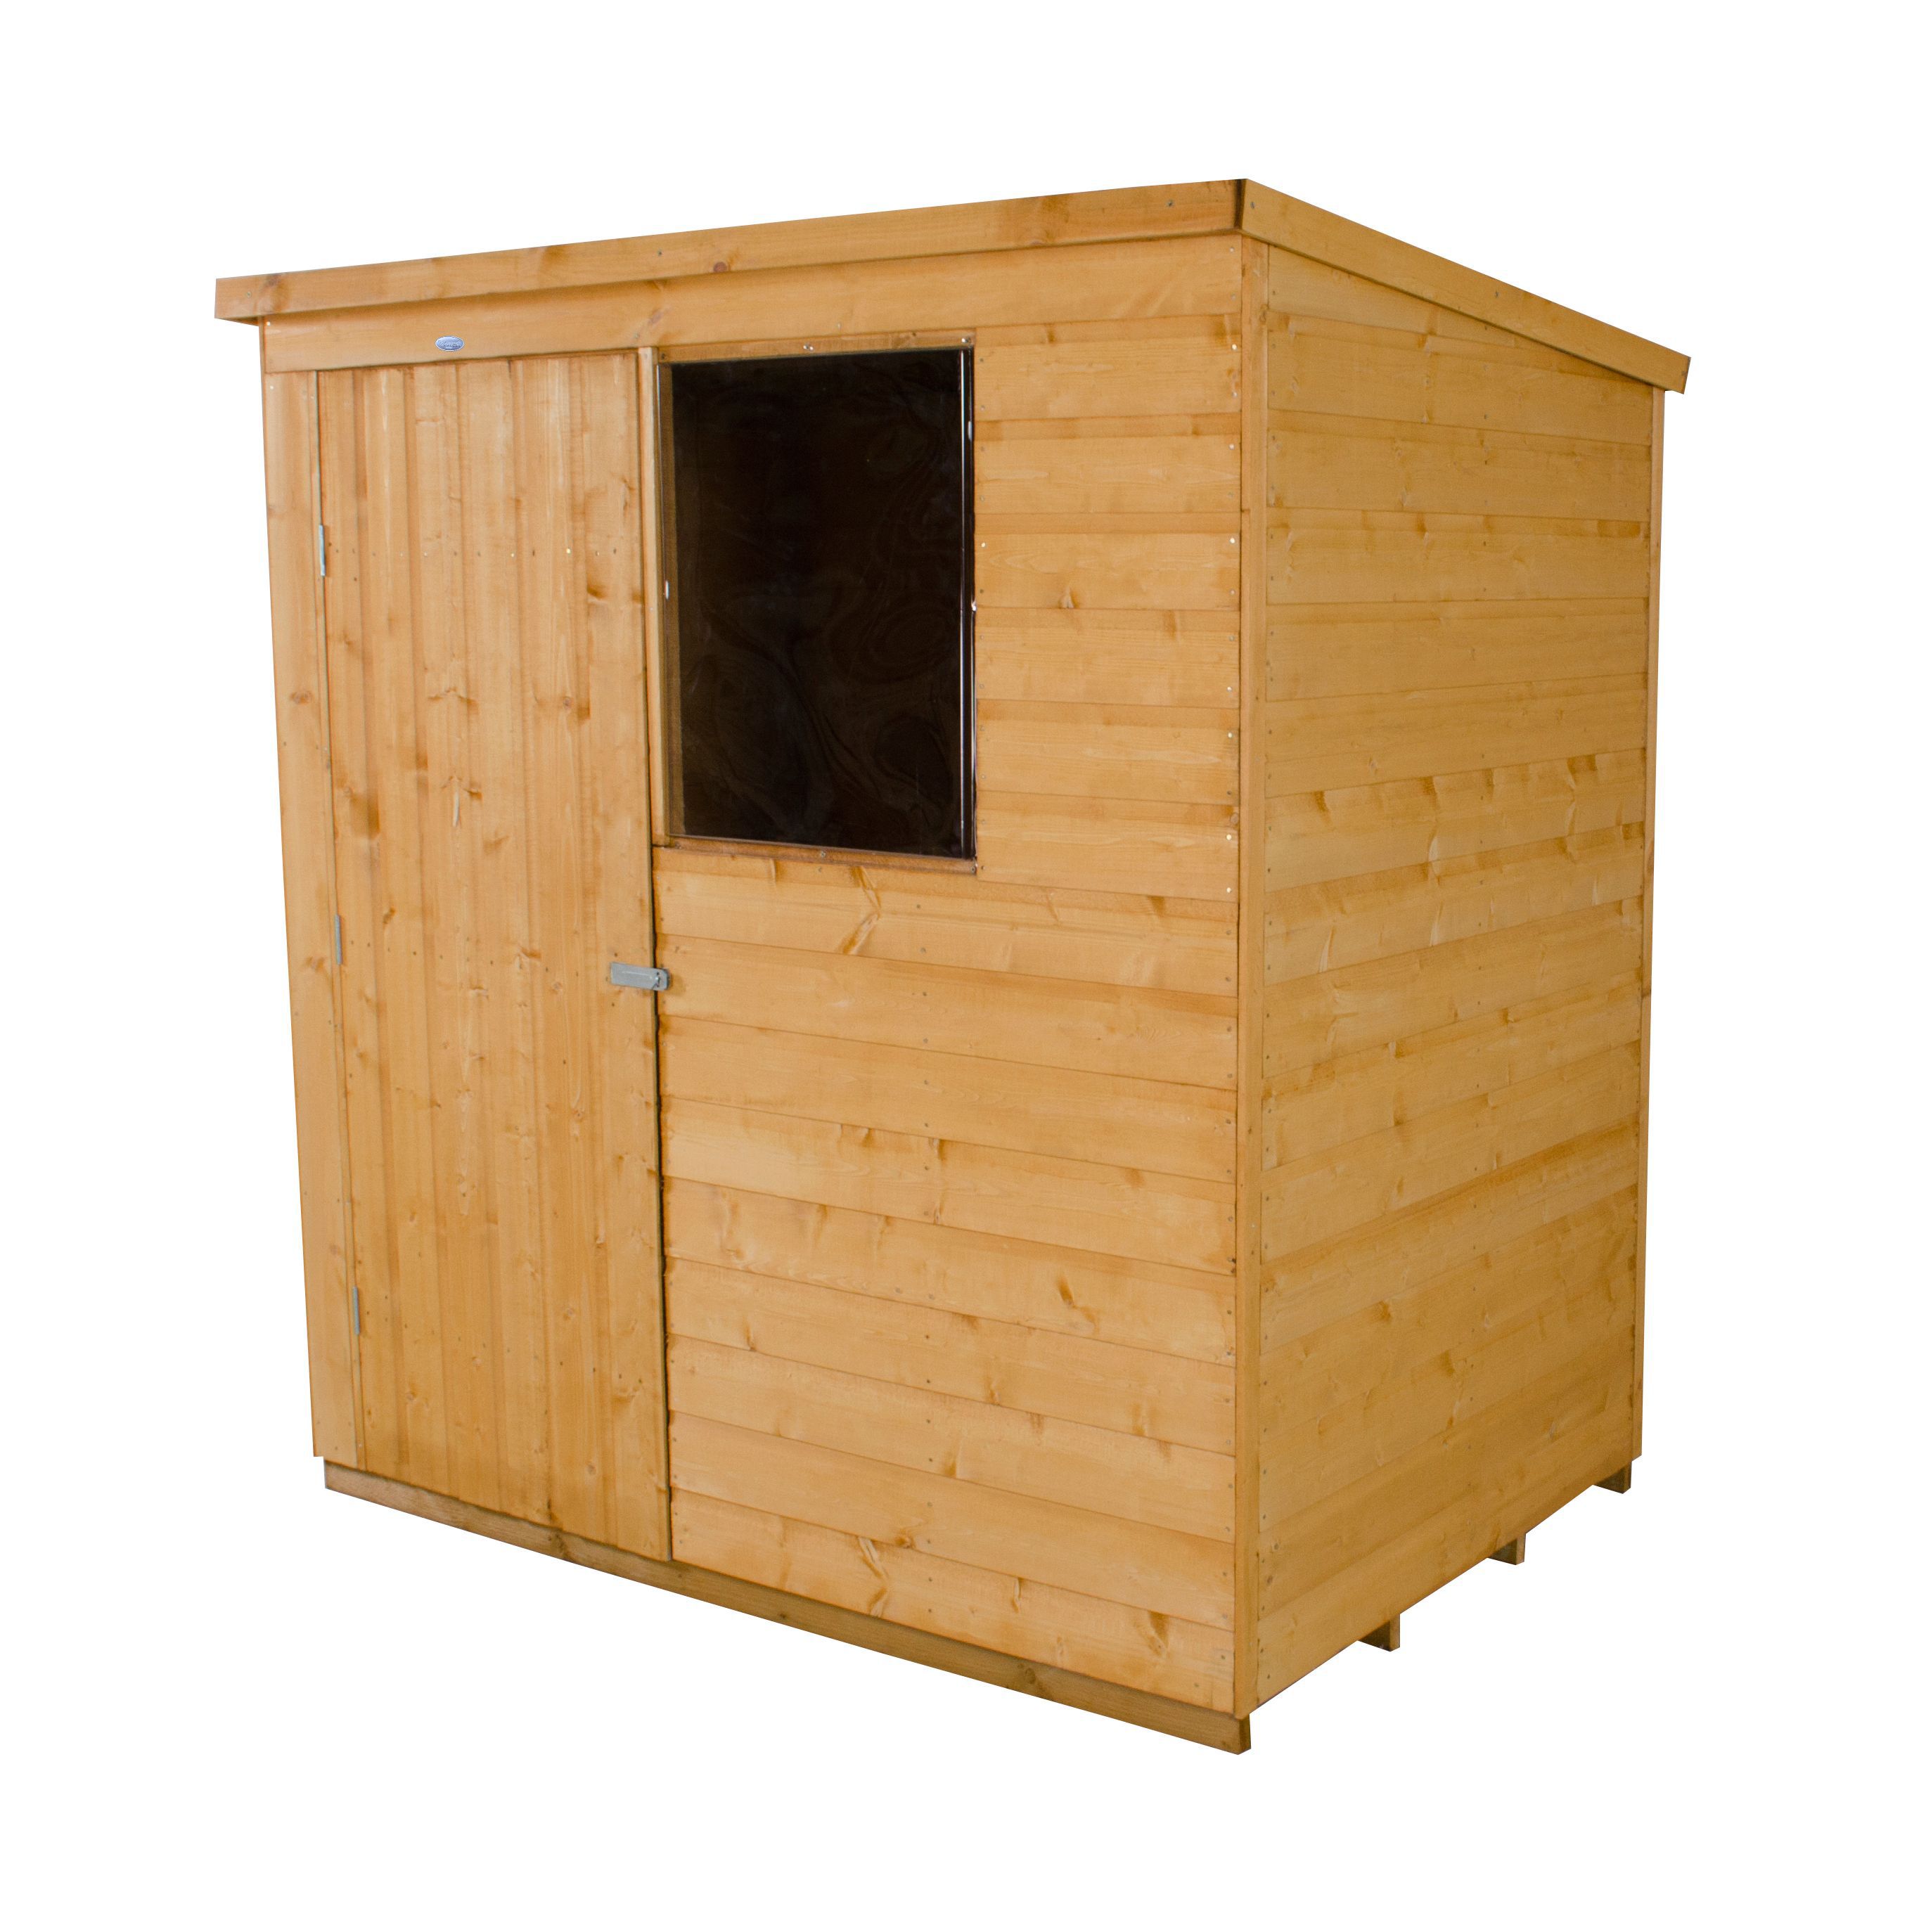 Forest Garden 6x4 Pent Shiplap Wooden Shed (Base included)